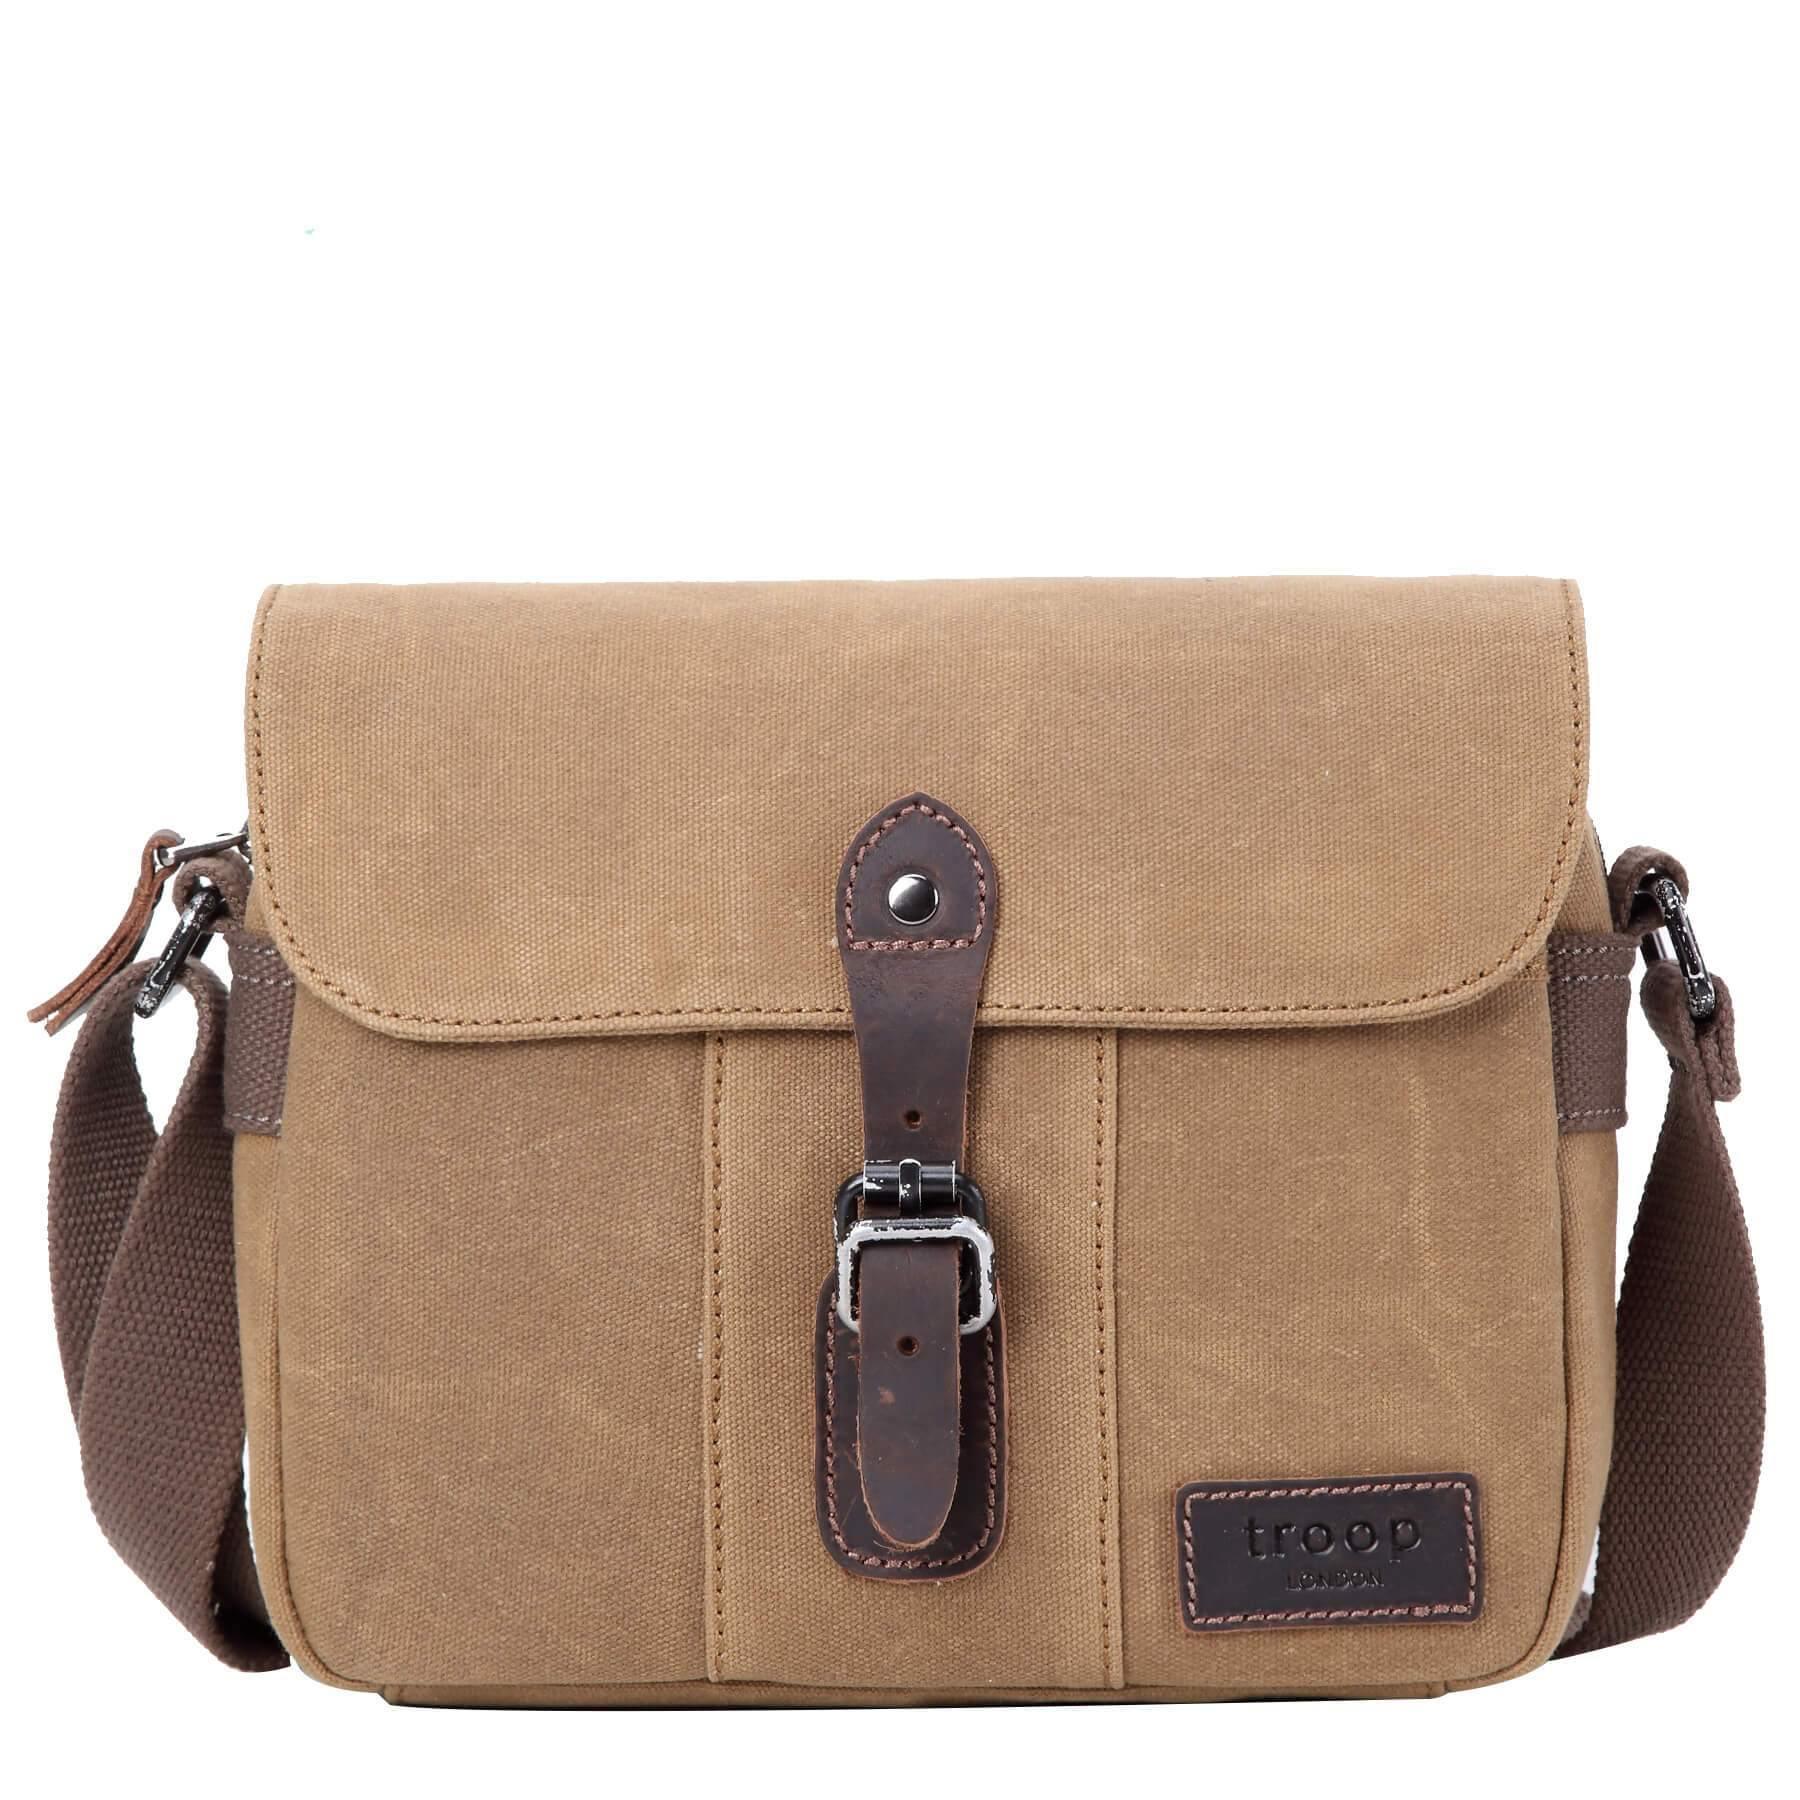 TRP0440 Troop London Heritage Canvas Leather Across body Bag, Small ...